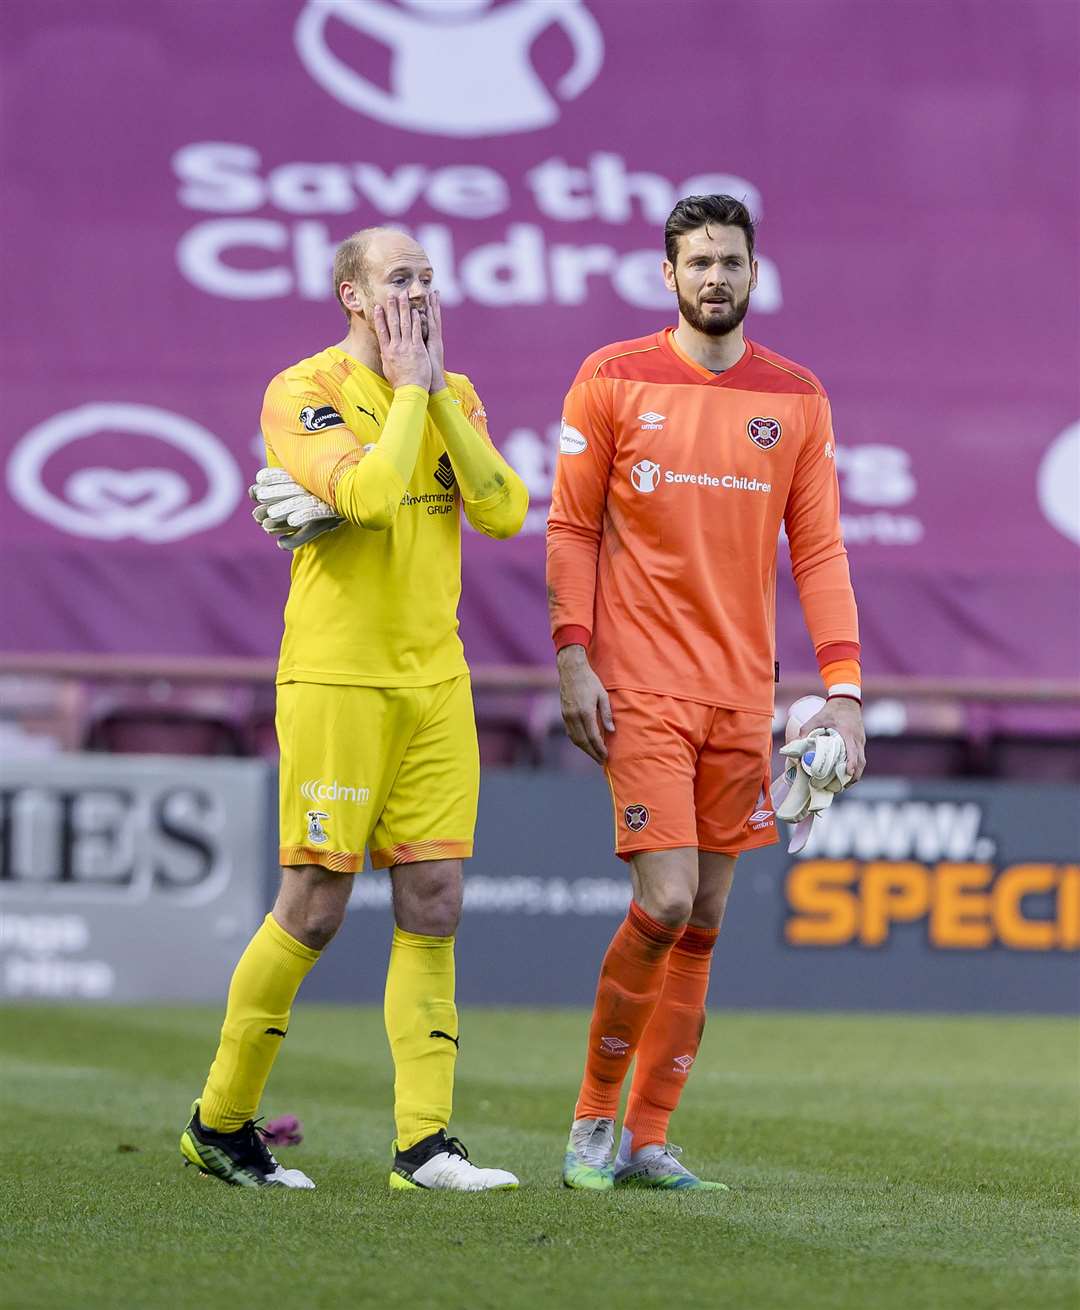 Picture - Ken Macpherson, Inverness. Hearts(3) v Inverness CT(0). 24.04.21. ICT 'keeper Mark Ridgers is consoled by Hearts 'keeper Craig Gordon at the end.